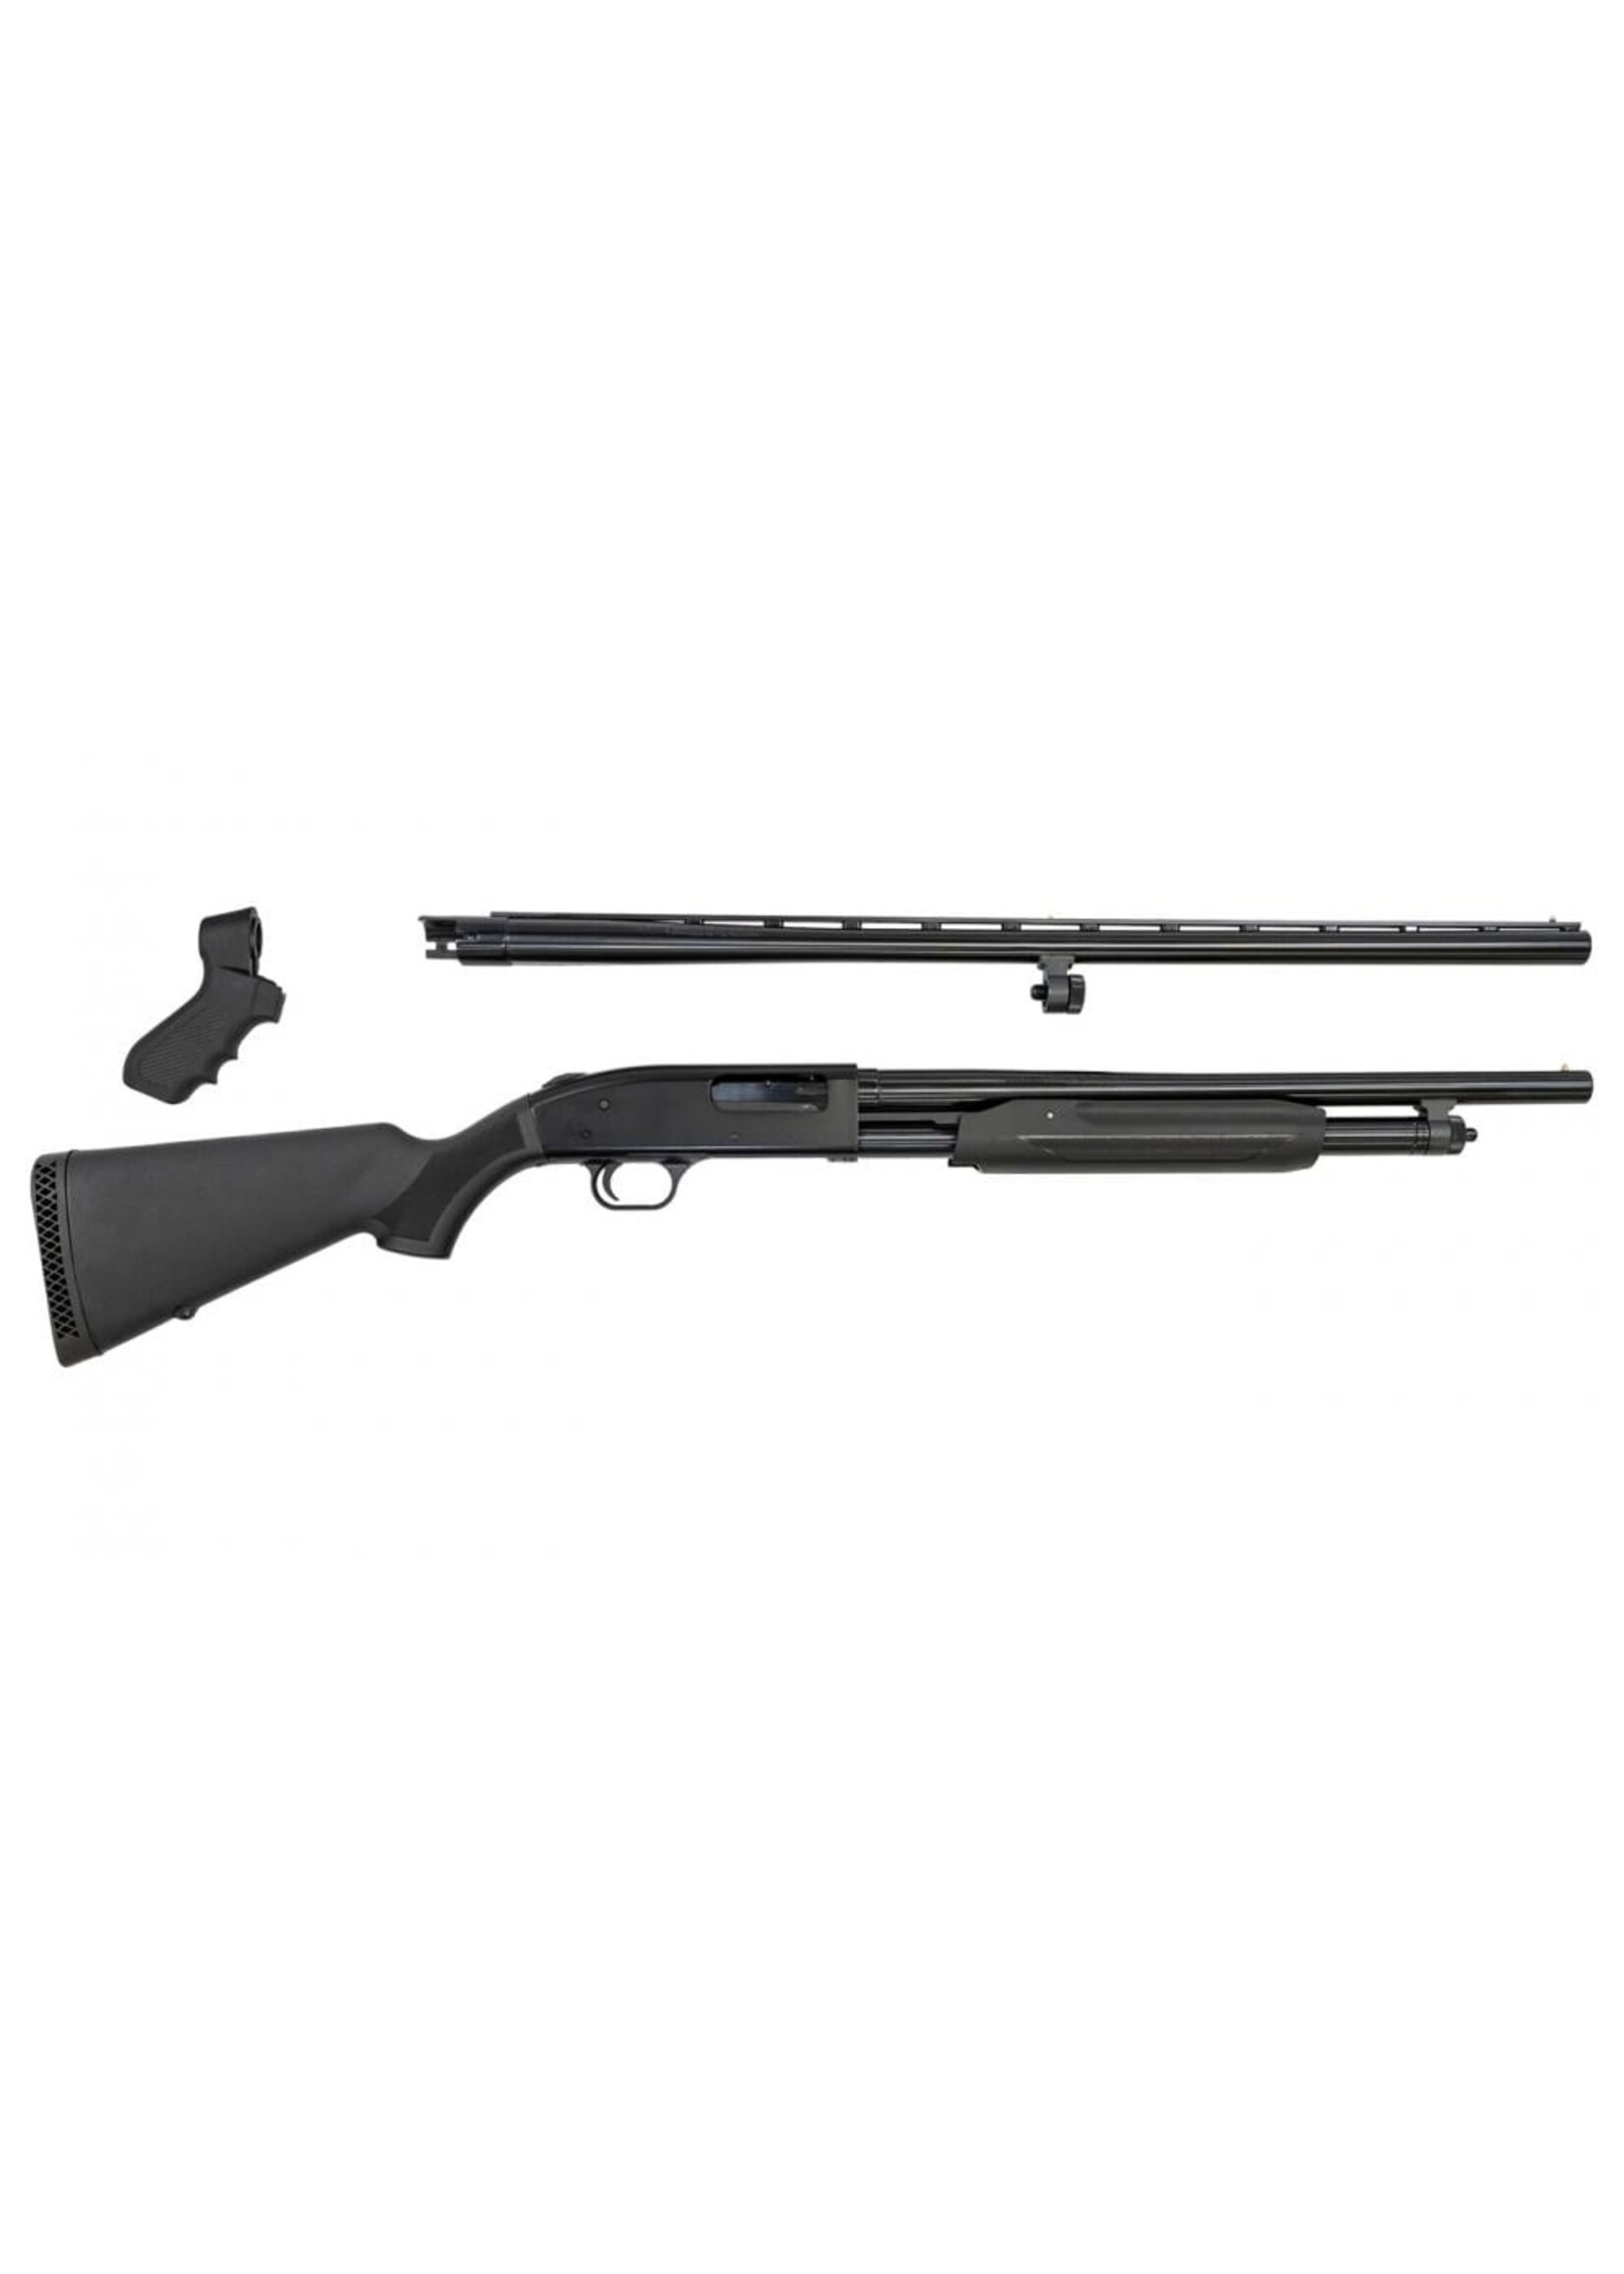 MOSSBERG MOSSBERG 500 FIELD SECURITY COMBO - SYTHENTIC | 12GA 5+1RD 18.5"/28"